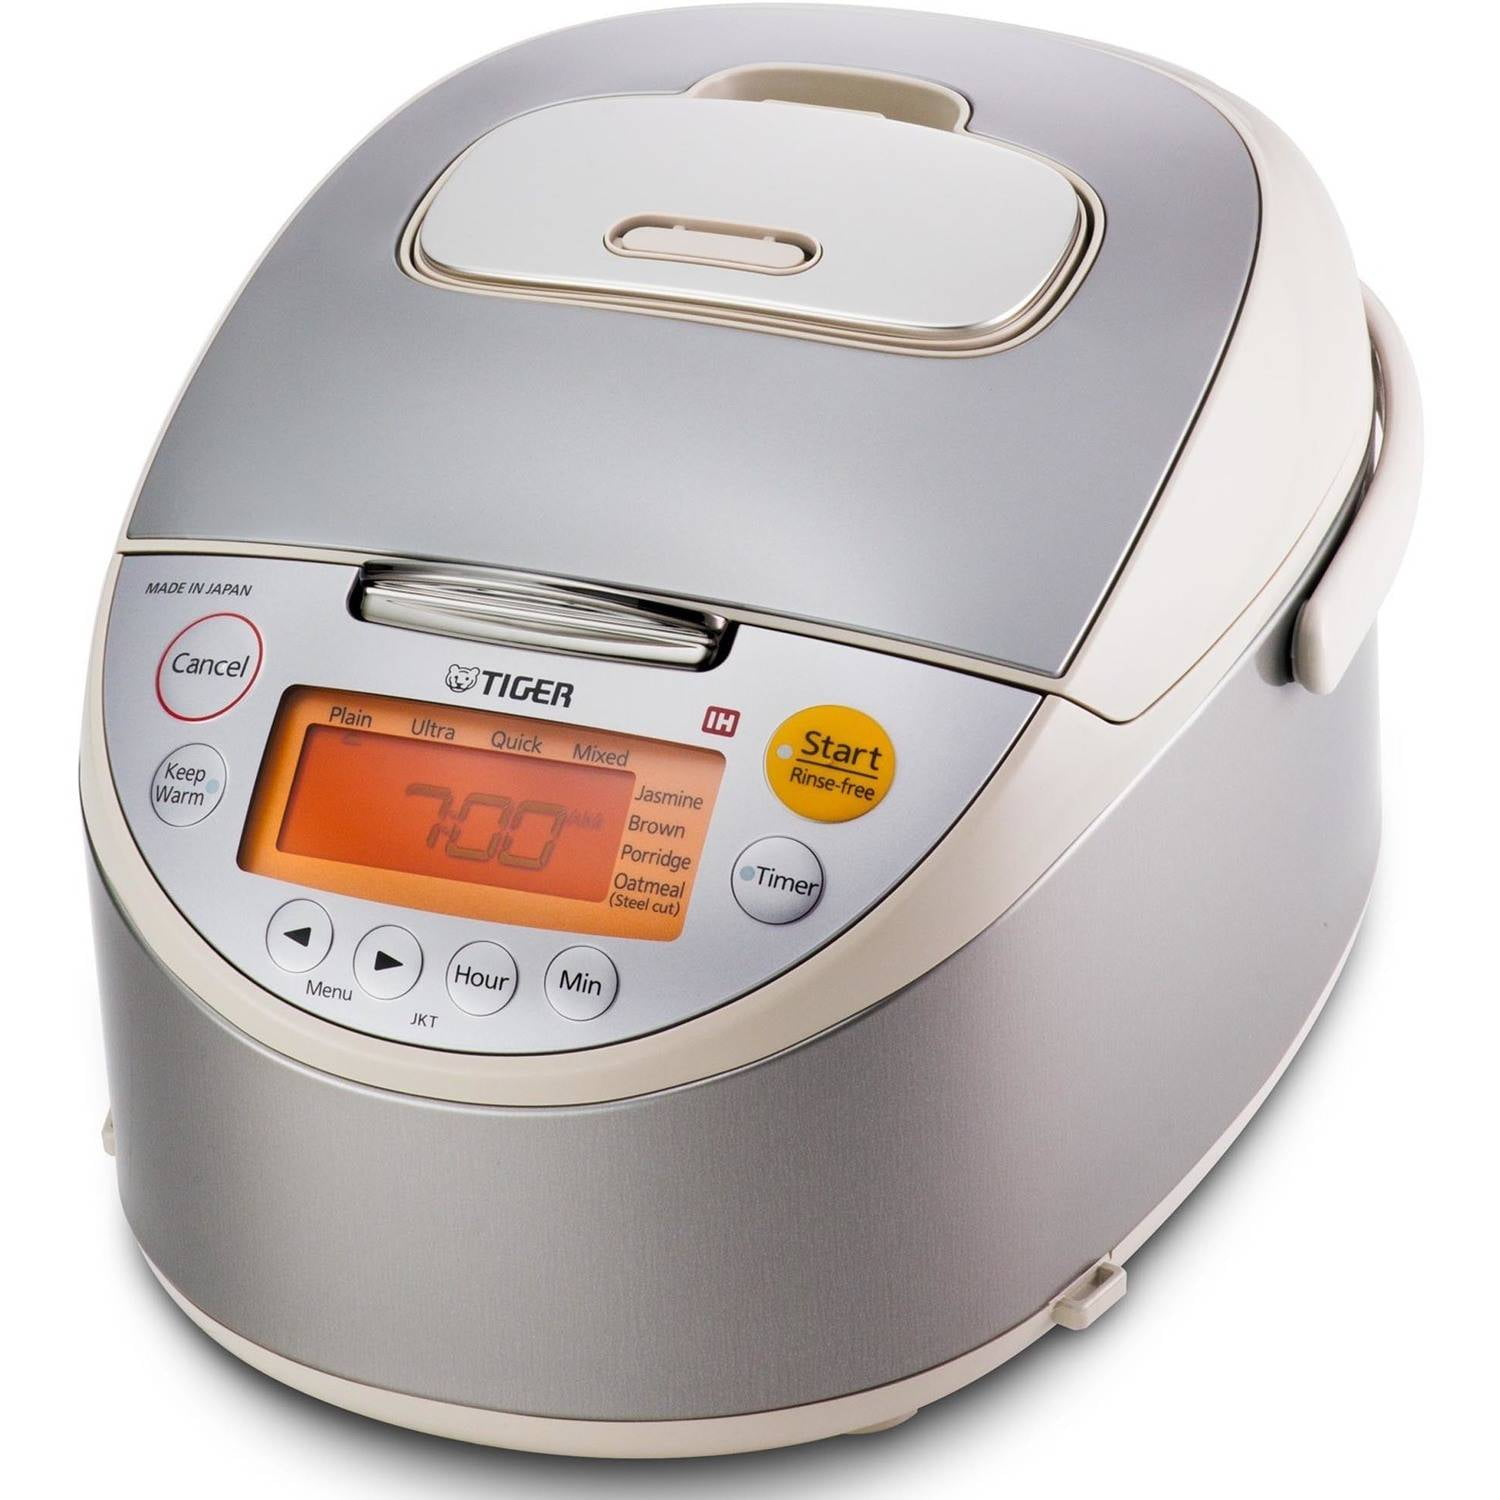 Tiger 5.5-Cup Stainless Steel Rice Cooker, Beige - Walmart.com Stainless Steel Rice Cooker Walmart